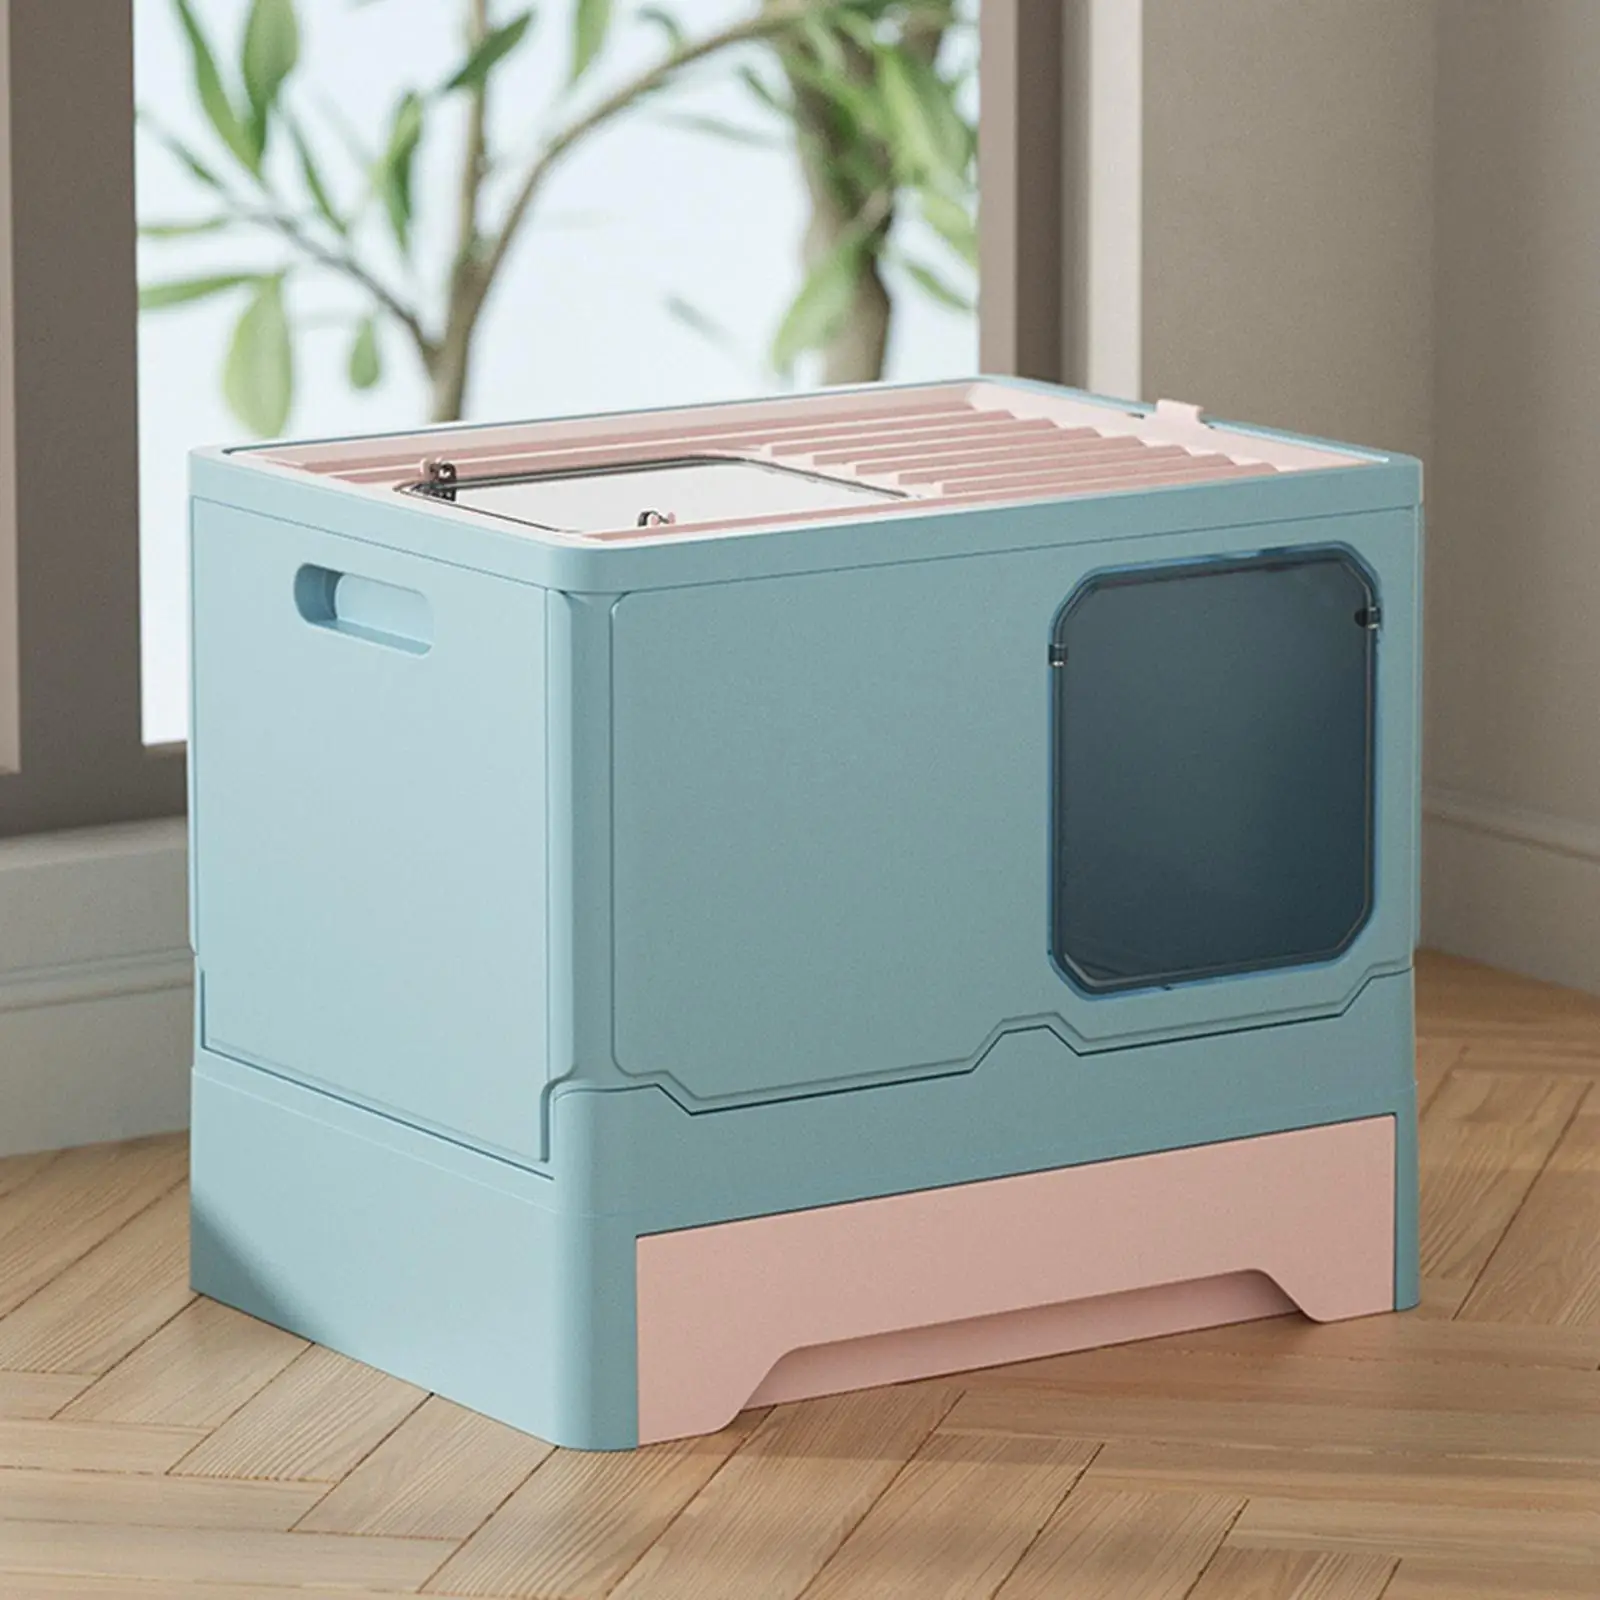 Foldable Cat Litter Box Toilet Hidden Anti Splashing  Enclosed Large Space with Scoop Portable Drawer Type Potty Pet Supplies